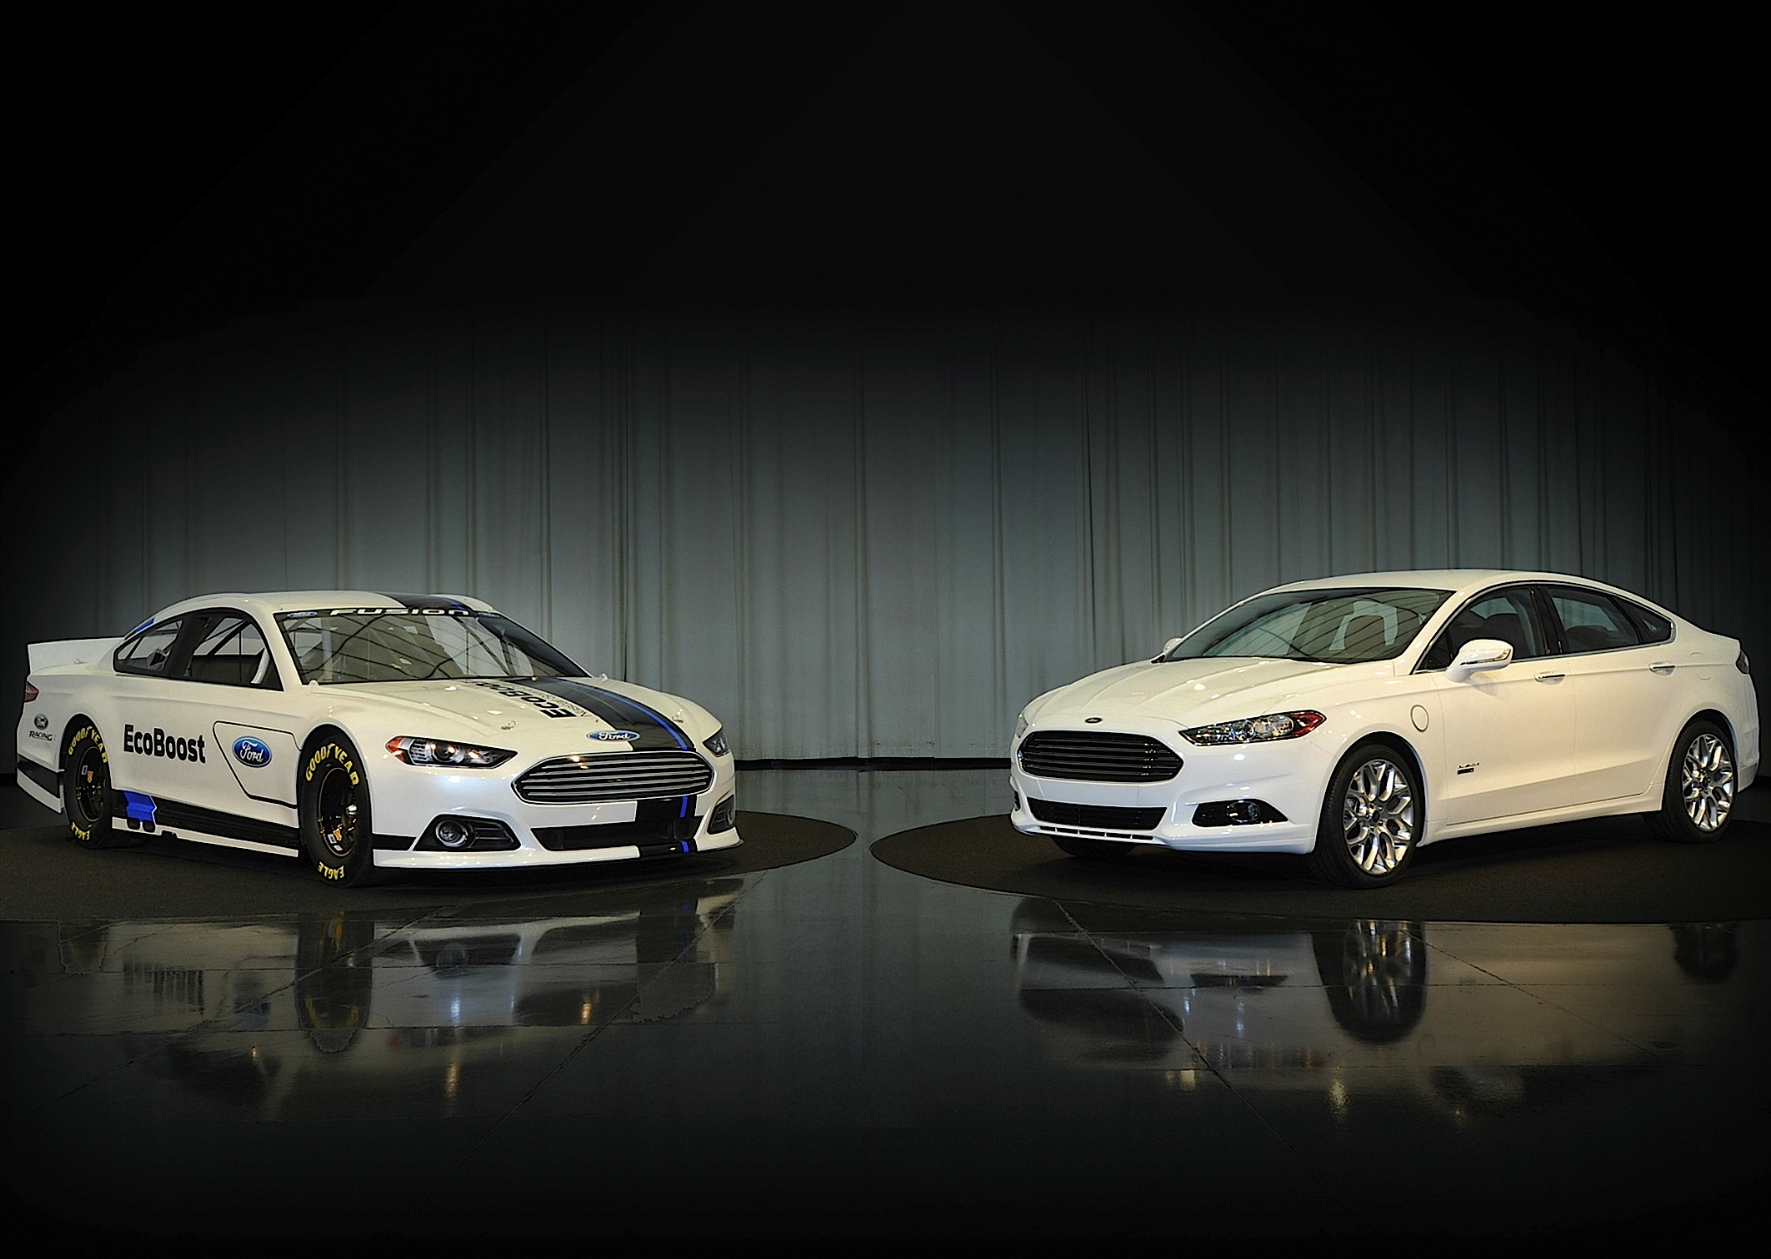 2013 Ford puts the “stock” back in Stock Car Racing